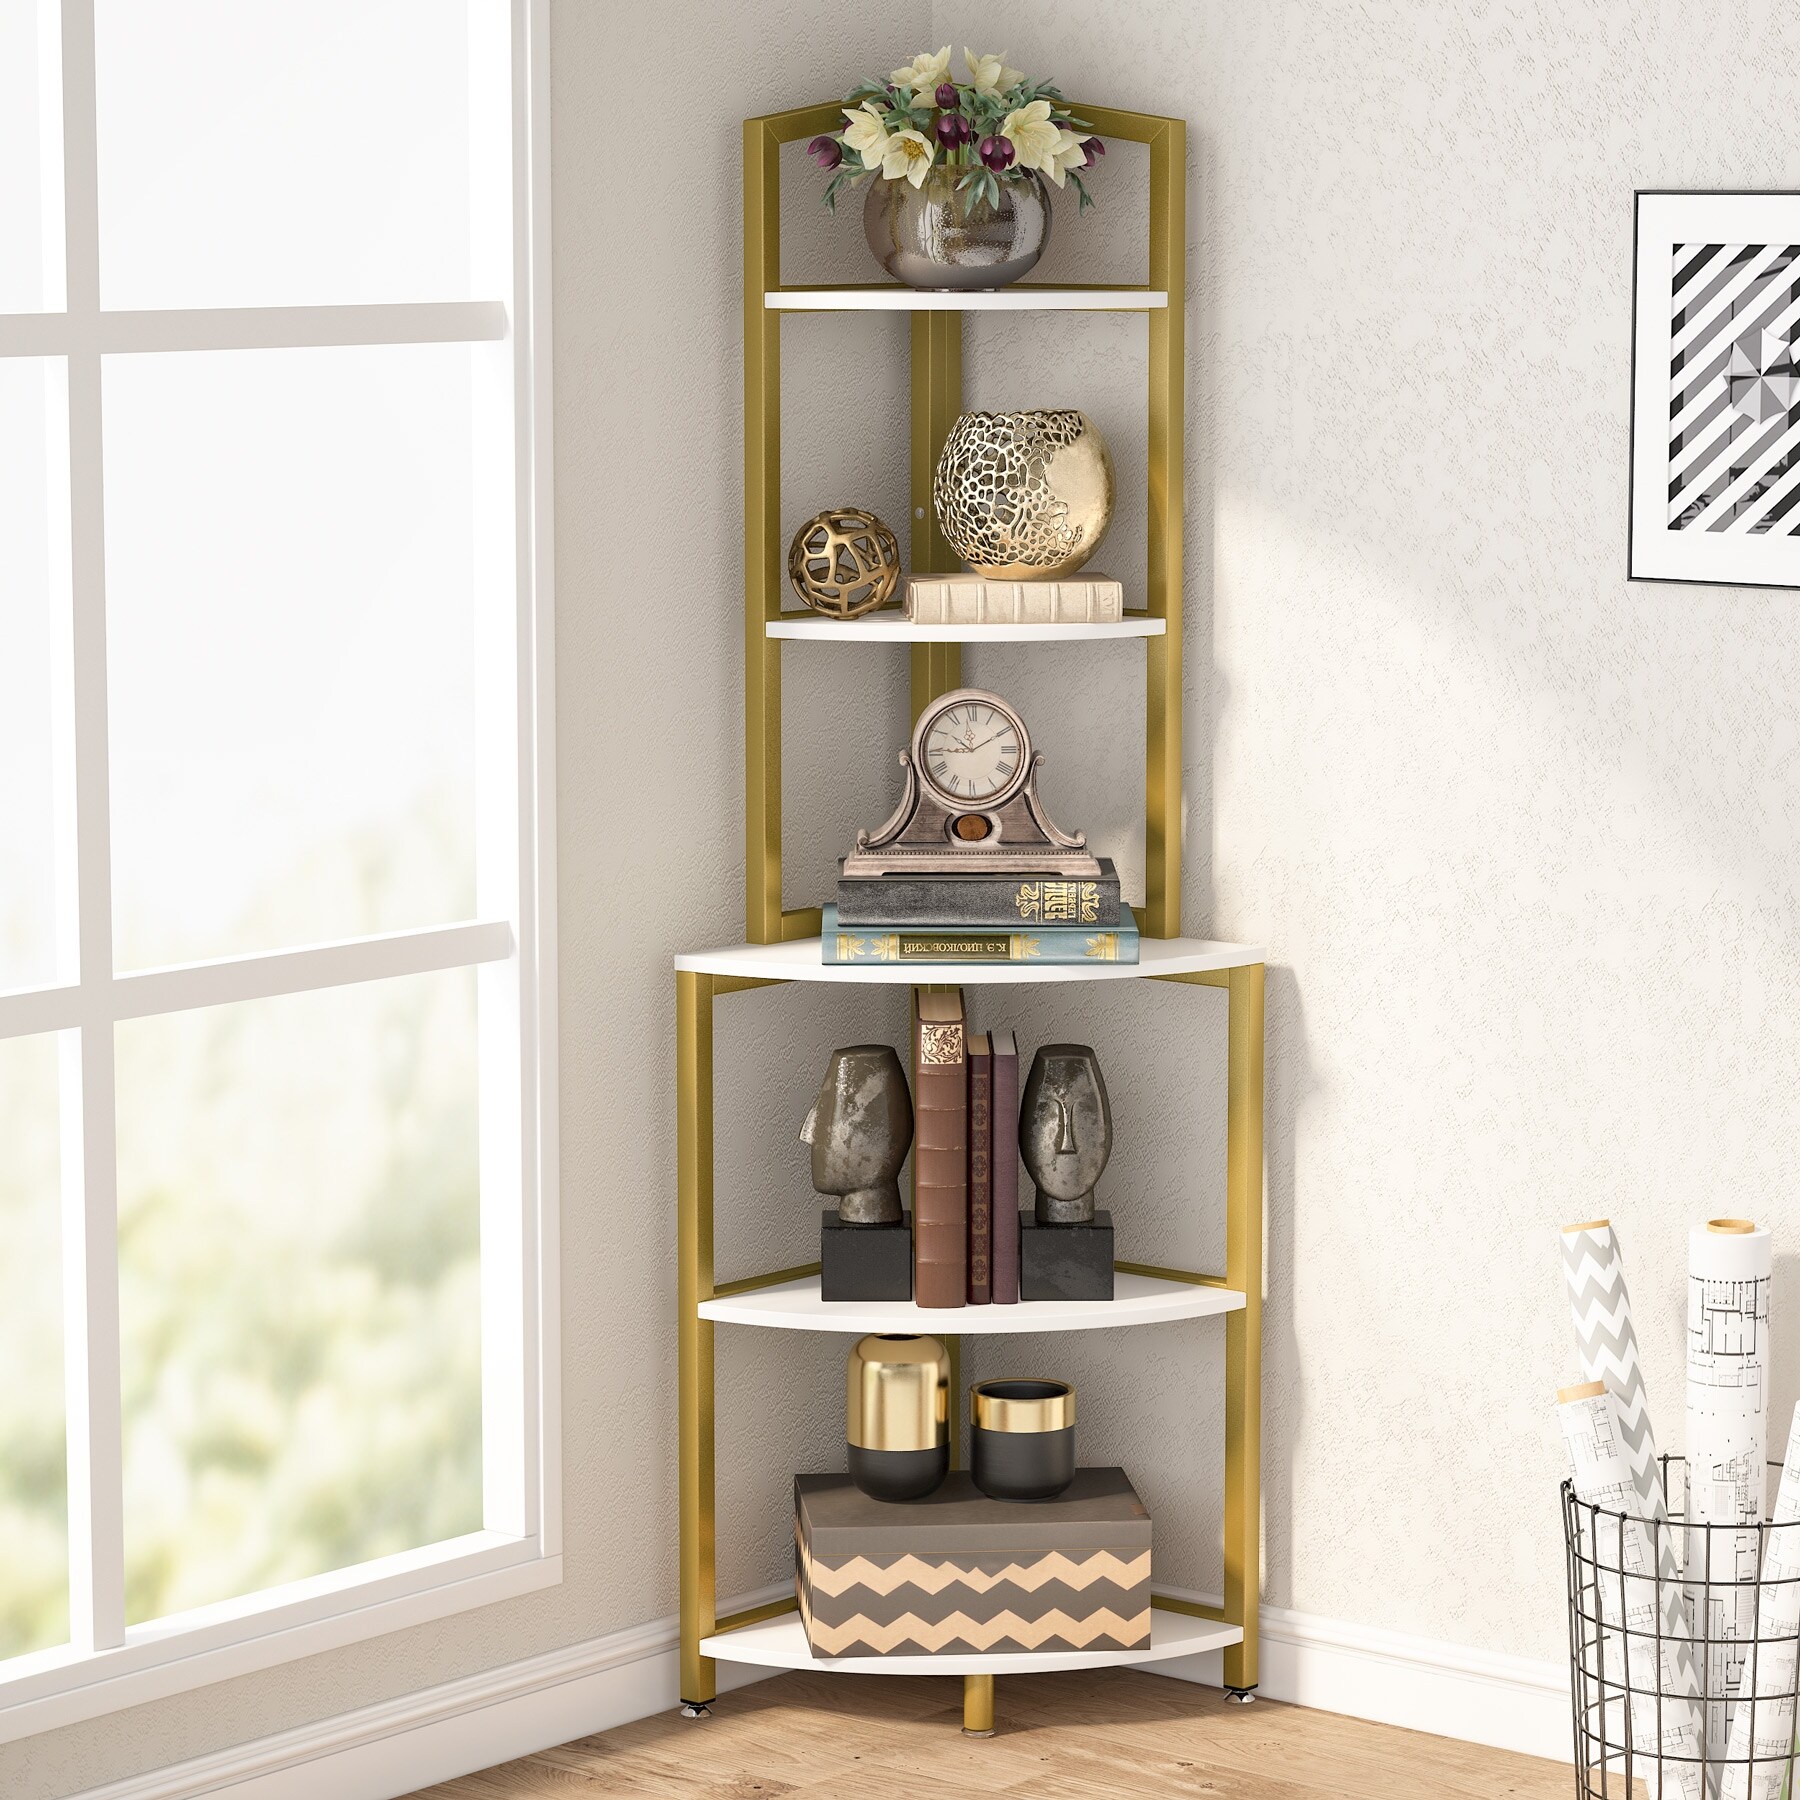 https://ak1.ostkcdn.com/images/products/is/images/direct/22a6839a9c15381f1c48cfcbe04fc8b2620d91d4/5-Tier-Corner-Shelf%2C-60-Inch-Bookcase-for-Living-Room%2C-Industrial-Corner-Storage-Rack-Plant-Stand-for-Home-Office.jpg